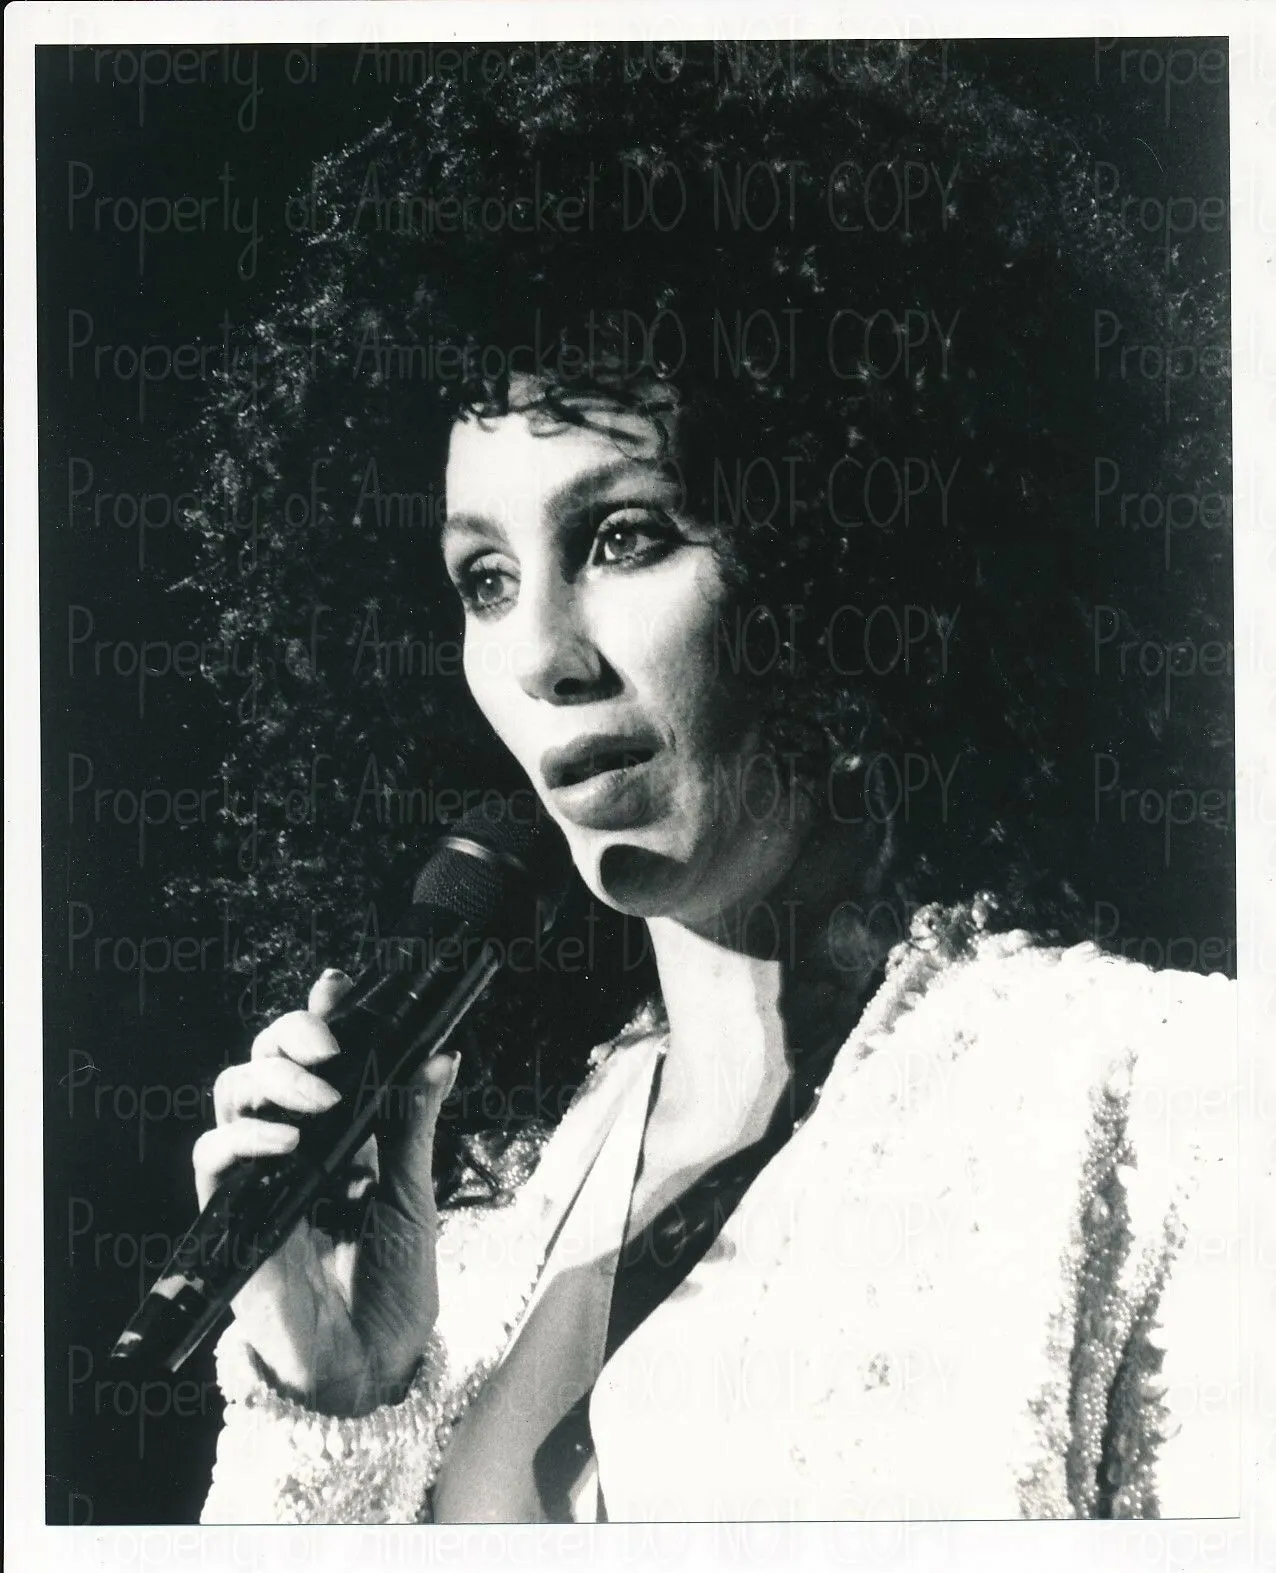 Aug 25-1990-cher "heart Of Stone" Tour Candid 8x10 B&w Photo-cne Grandstand-#8